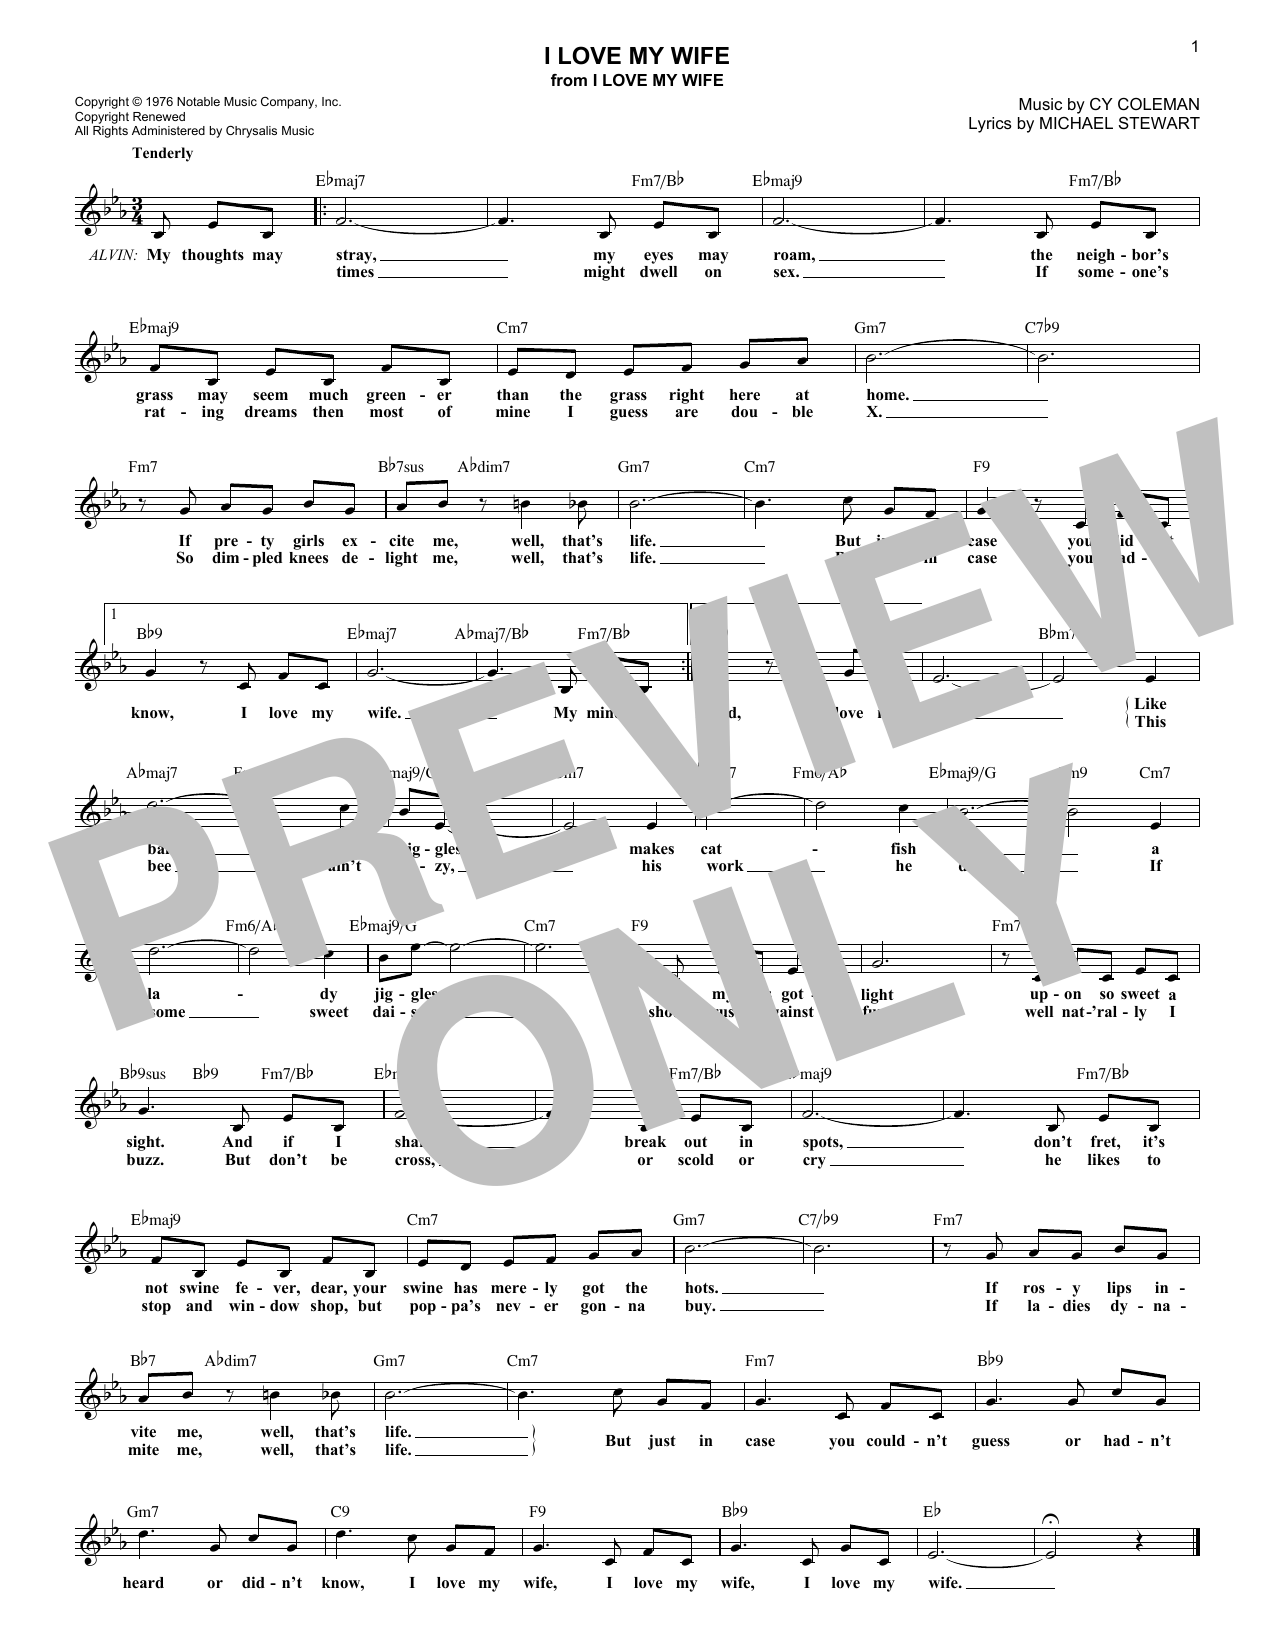 Download Cy Coleman I Love My Wife Sheet Music